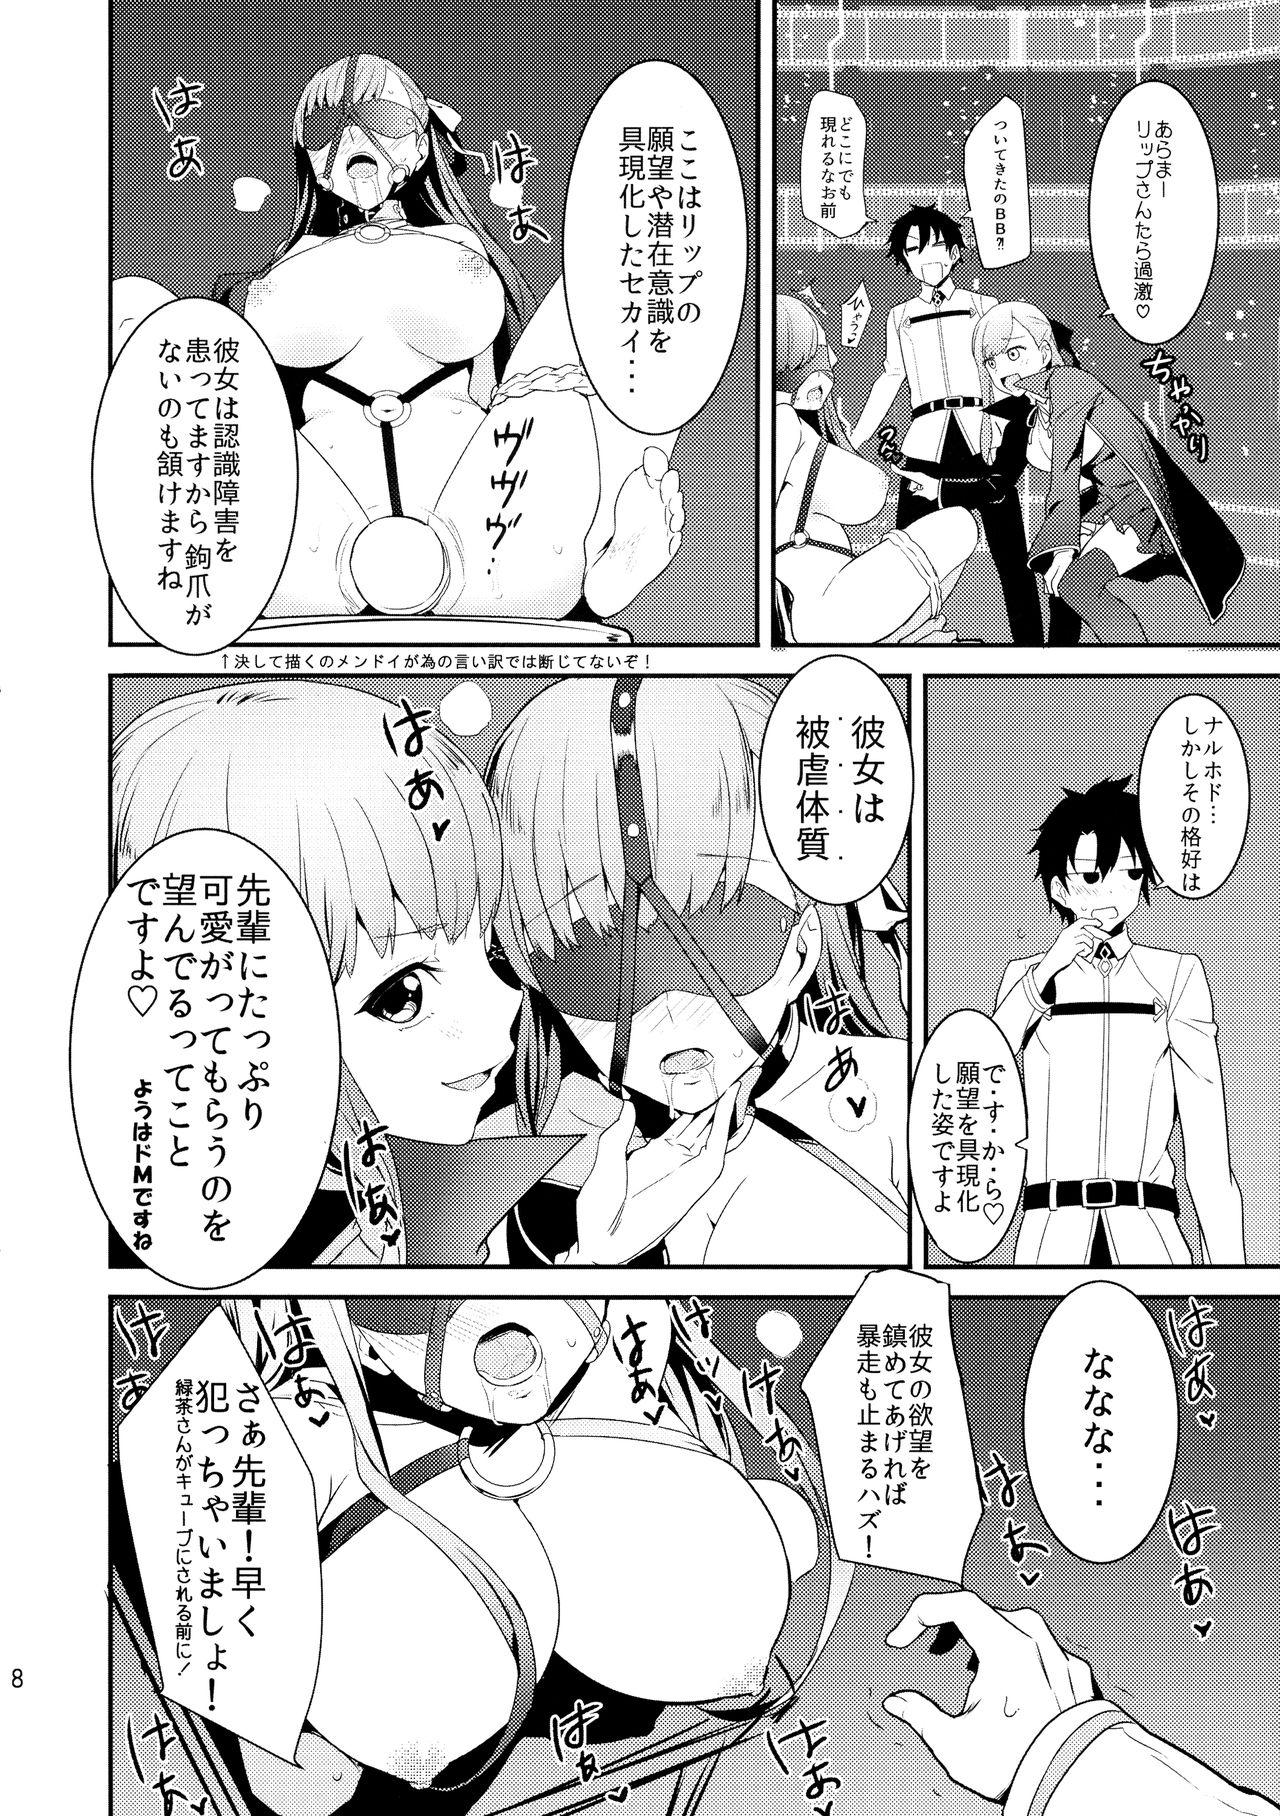 Tattoos In the Passion, Melty heart. 1 - Fate grand order Lesbian Sex - Page 10